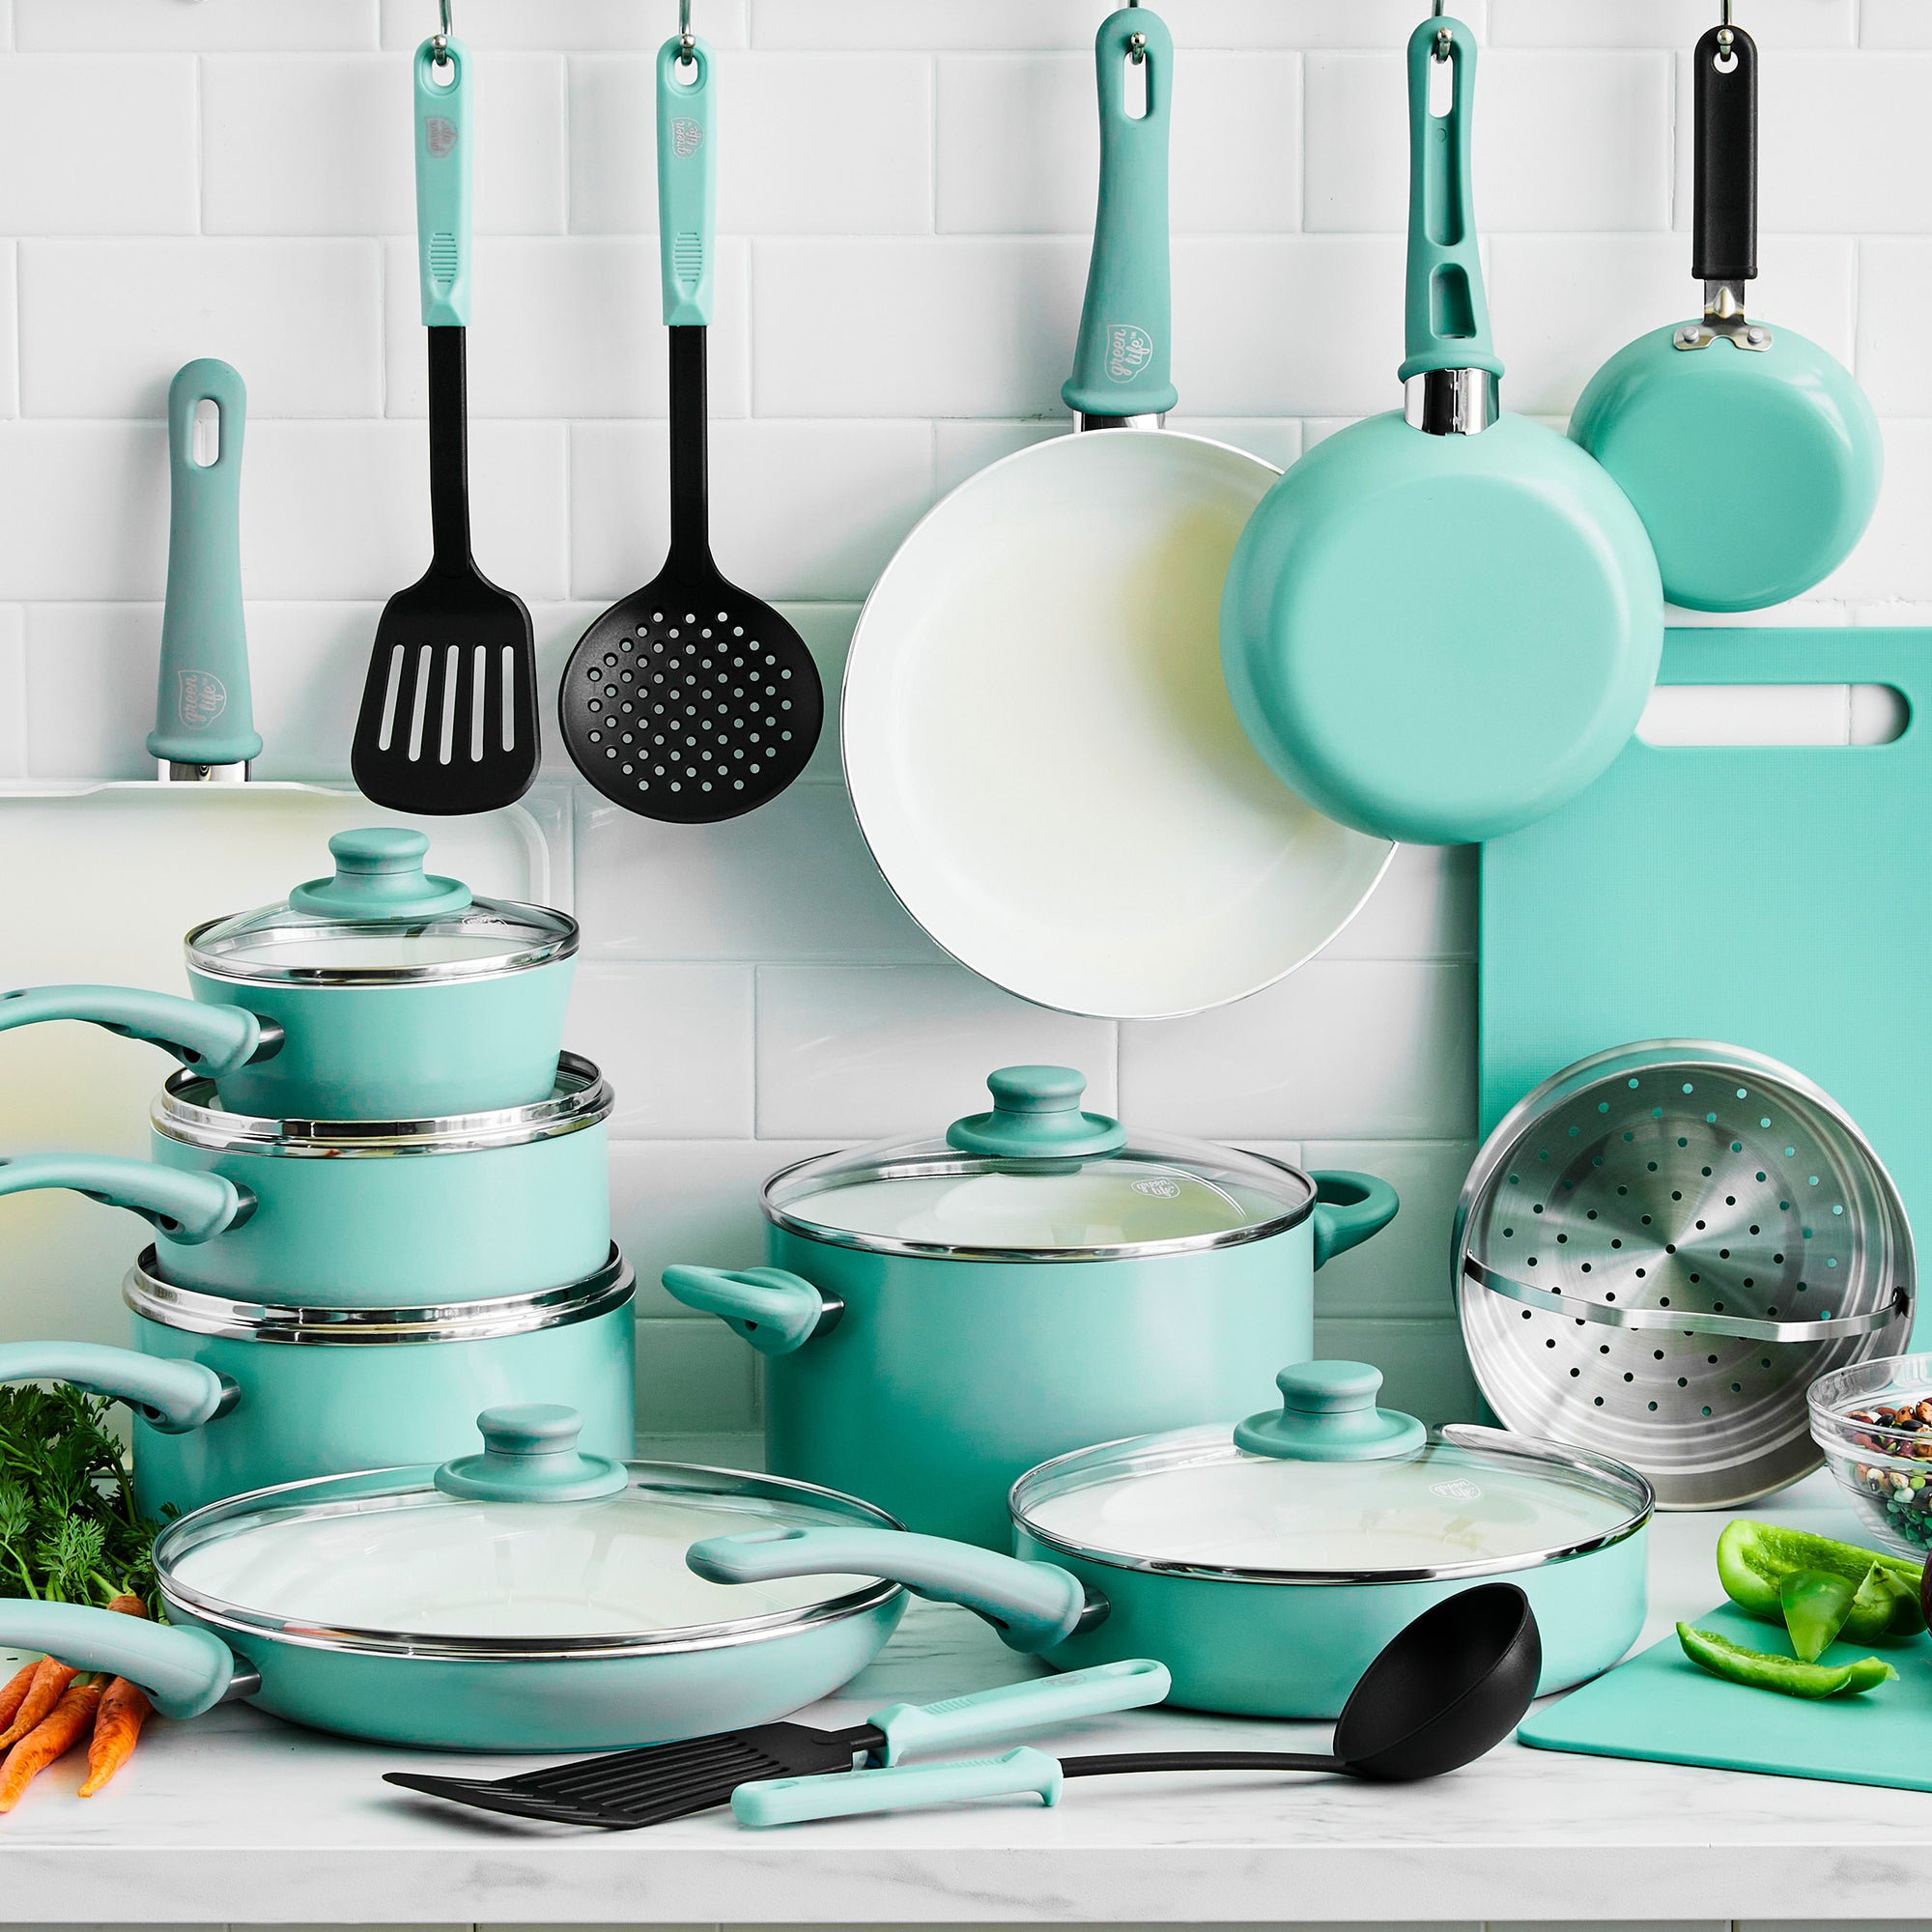 GreenLife Soft Grip Healthy Ceramic Nonstick 16 Piece Cookware Pots and Pans  Set, PFAS-Free, Dishwasher Safe, Turquoise